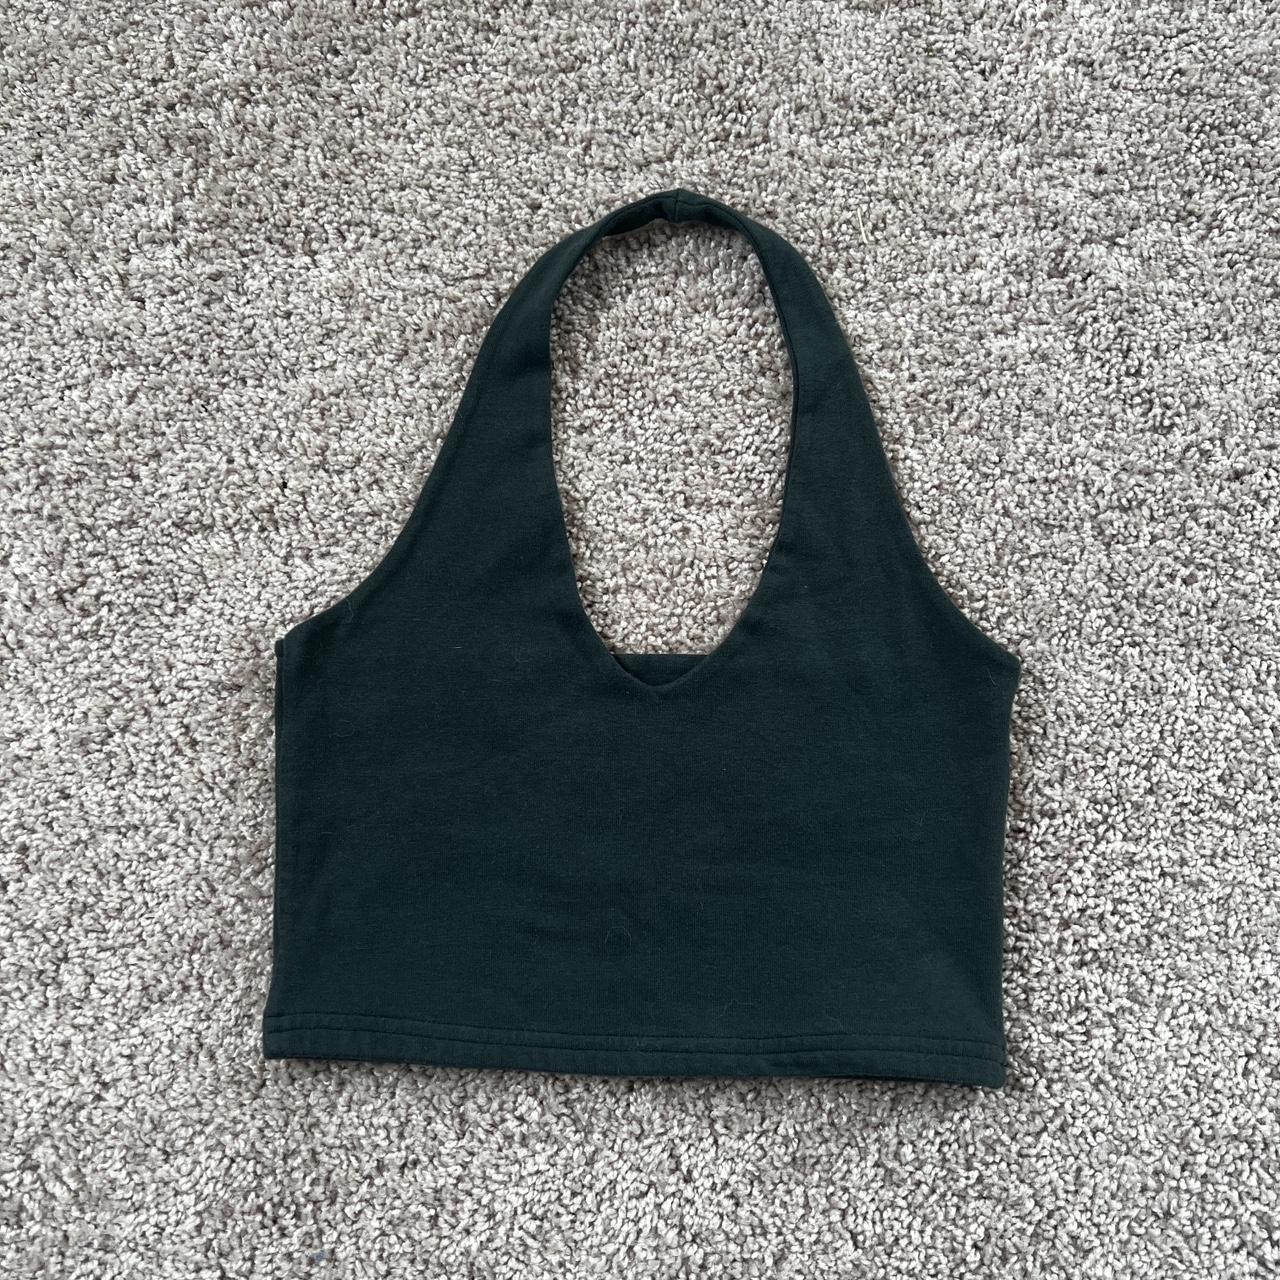 Brandy Melville Forest Green Halter Top. tagged OS